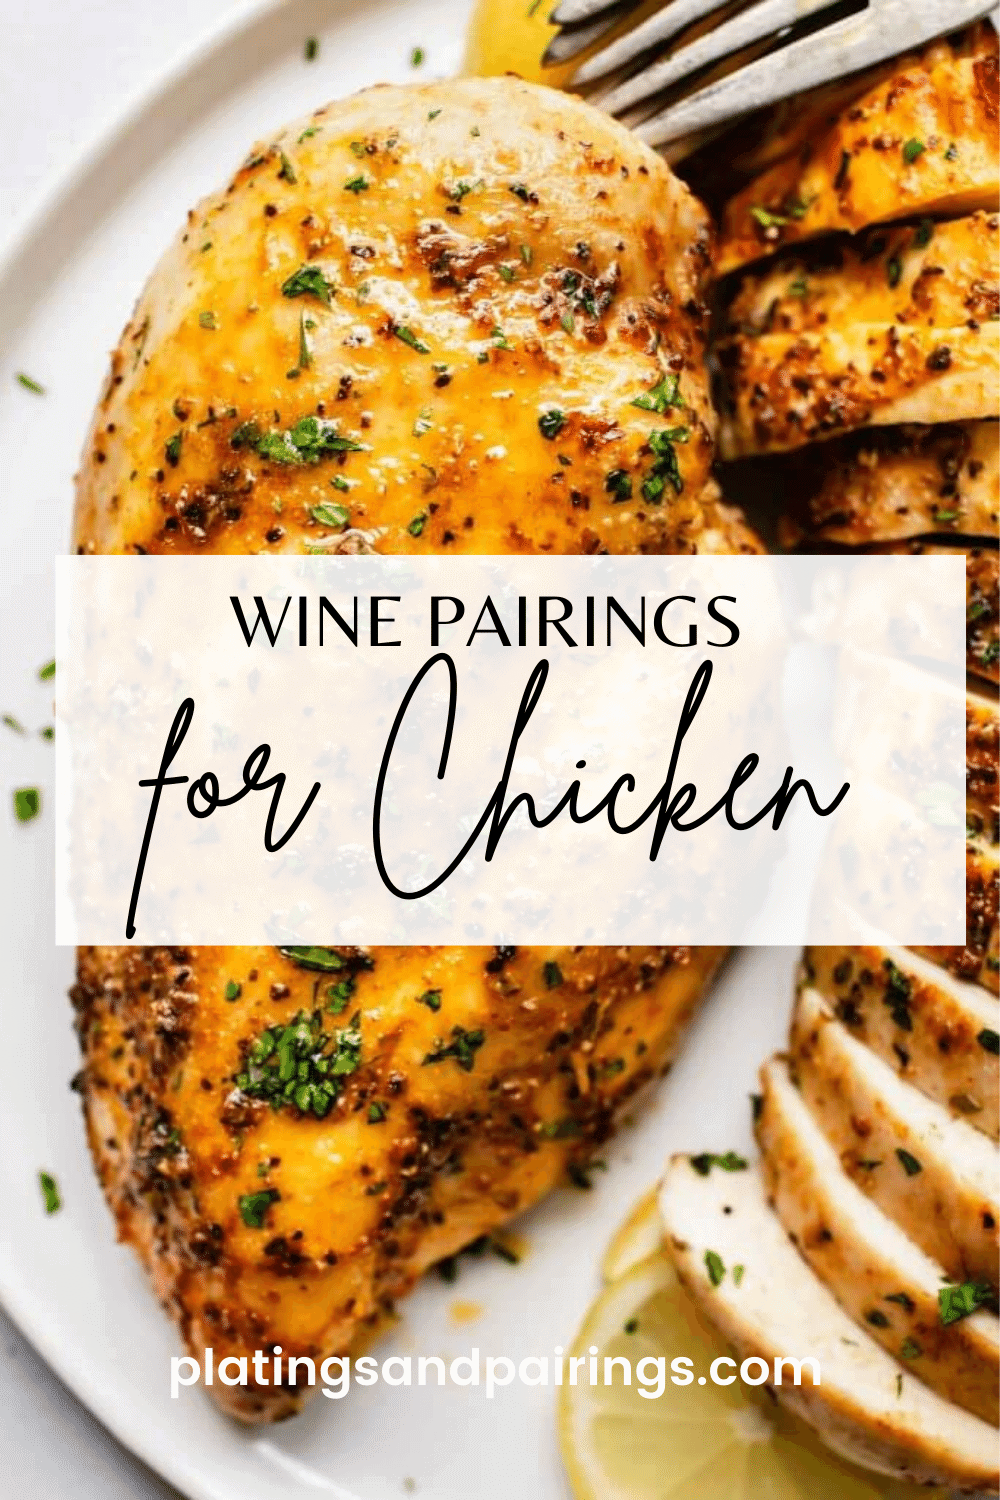 COOKED CHICKEN BREAST WITH TEXT OVERLAY - WINE PAIRINGS FOR CHICKEN.